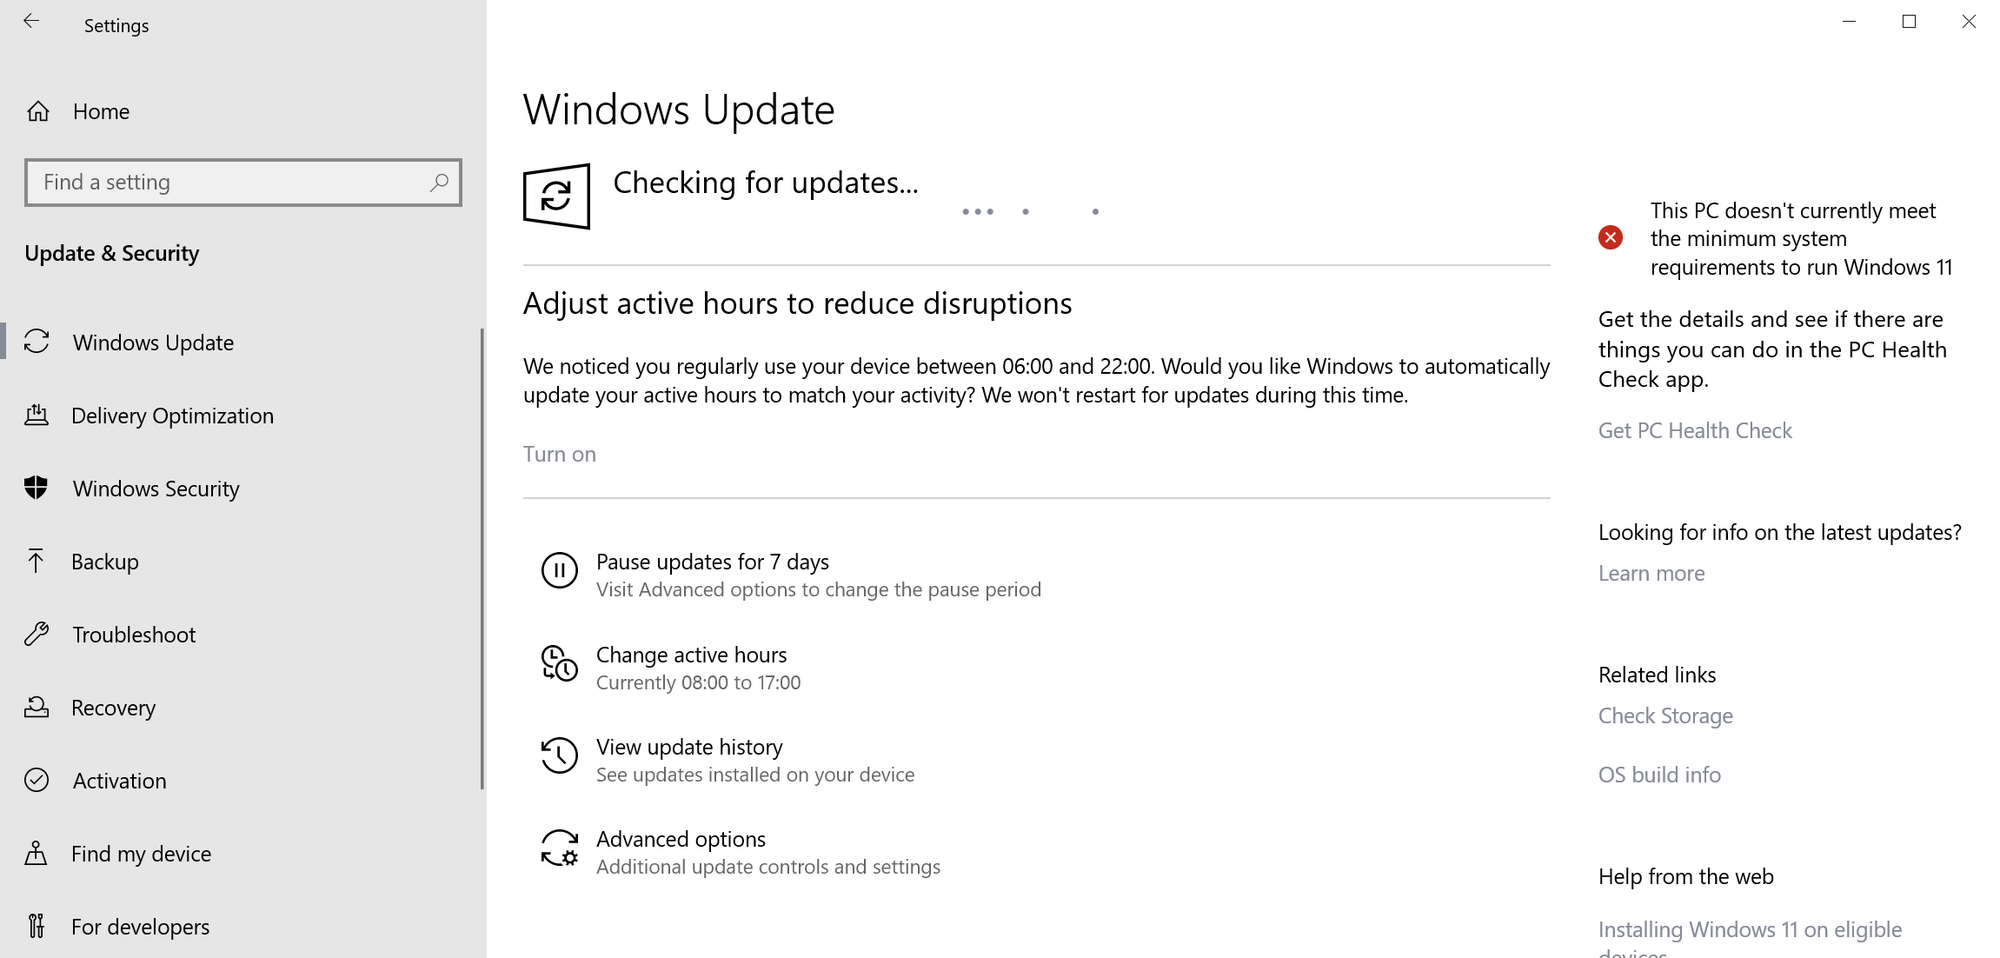 Windows 10 version 22H2 is ready for broad deployment windows-10-version-22h2-2022-update.png